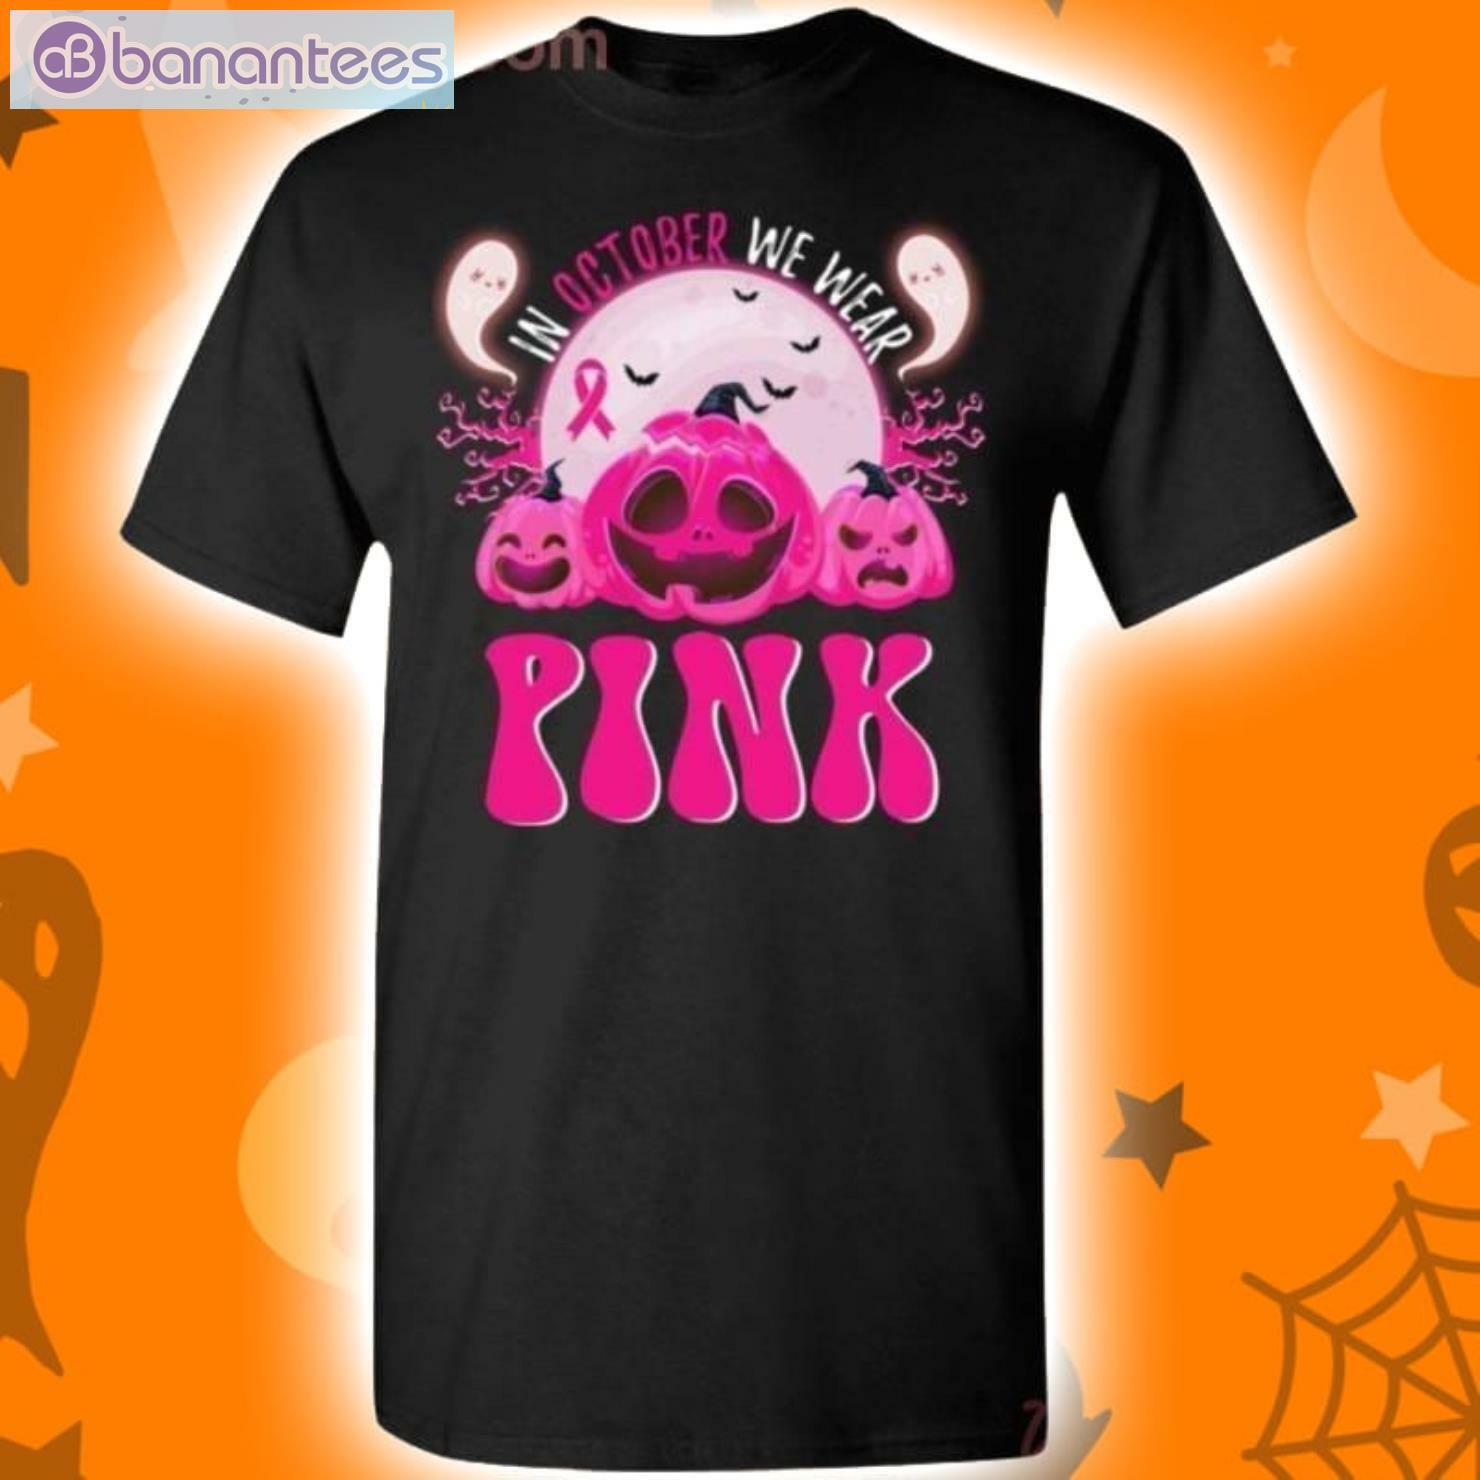 In October We Wear Pink Breast Cancer Pumpkin Halloween T-Shirt Product Photo 1 Product photo 1